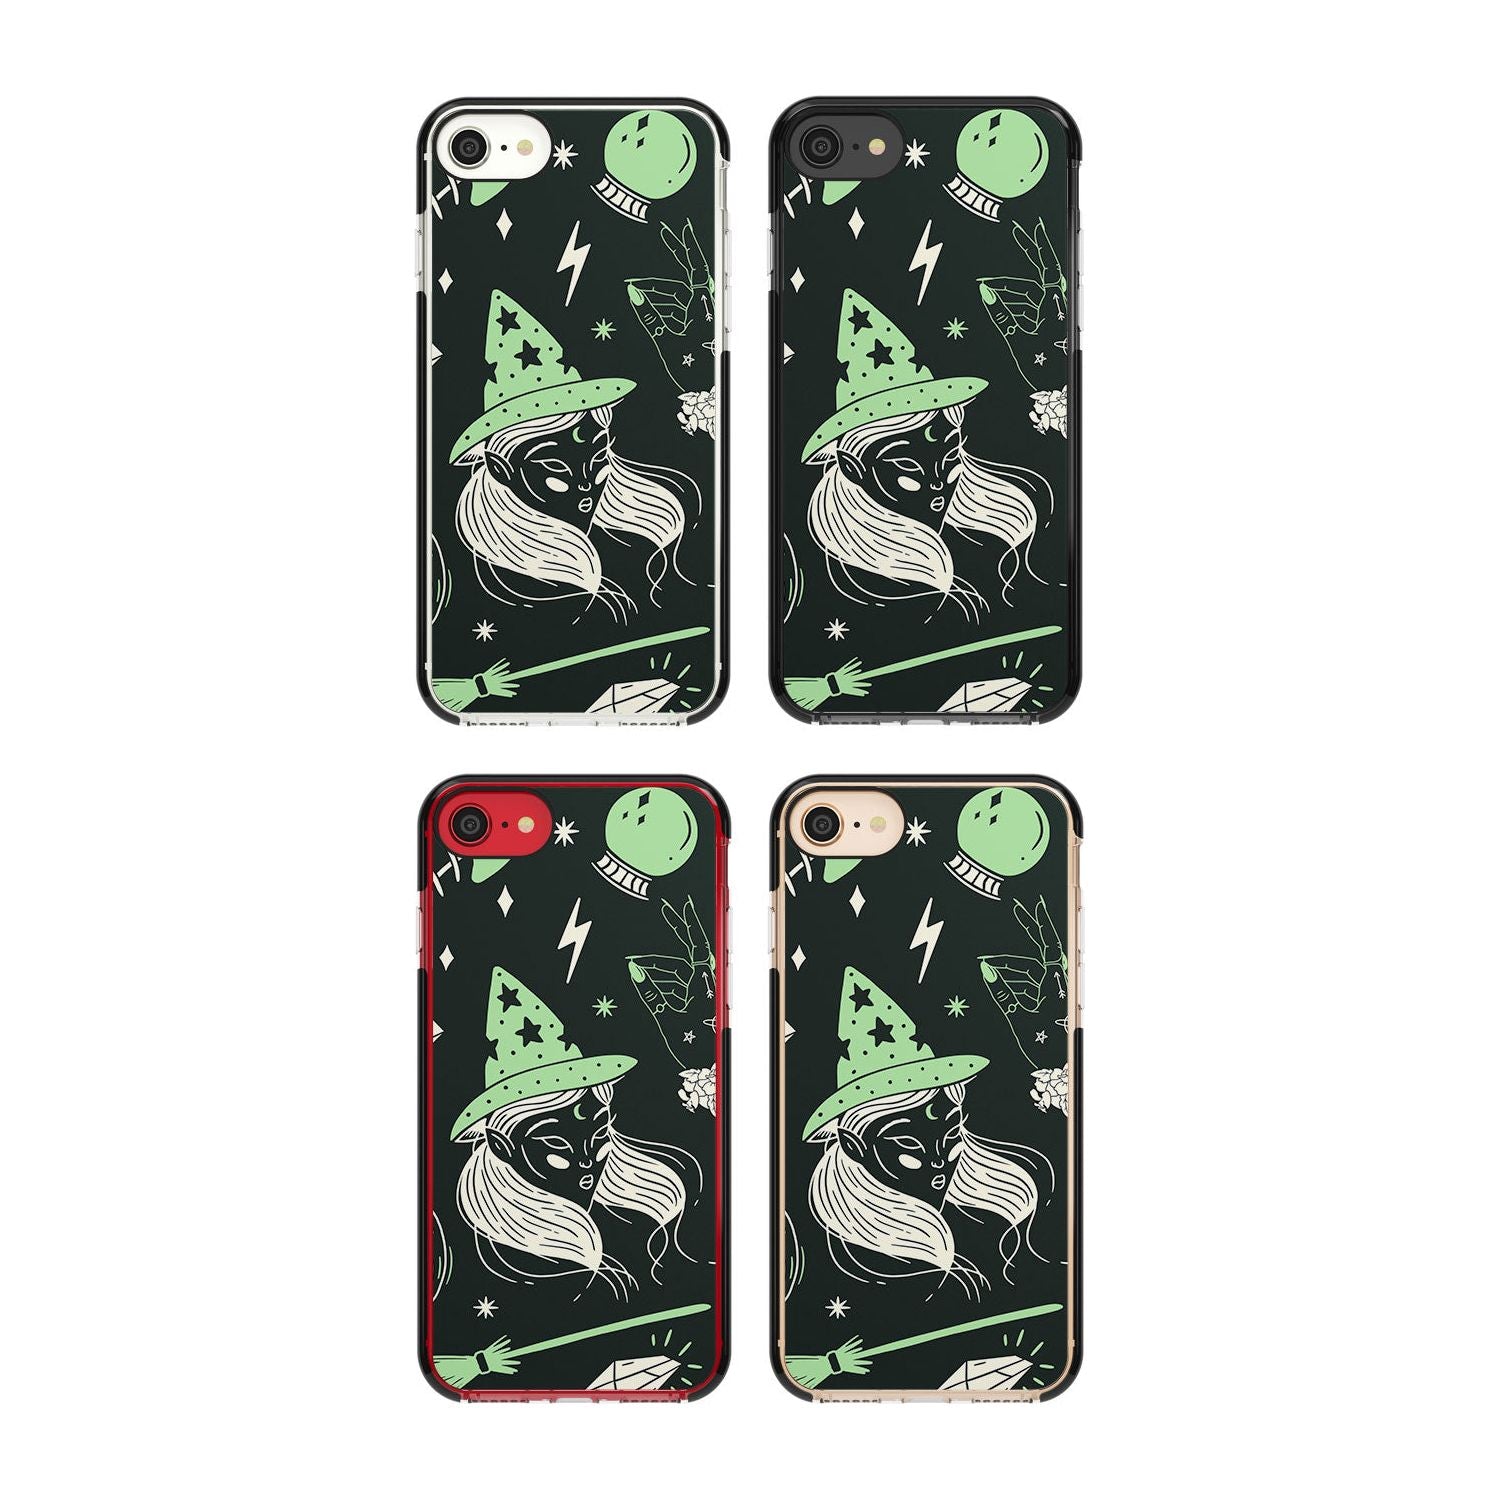 Halloween Mix Pattern Phone Case for iPhone SE